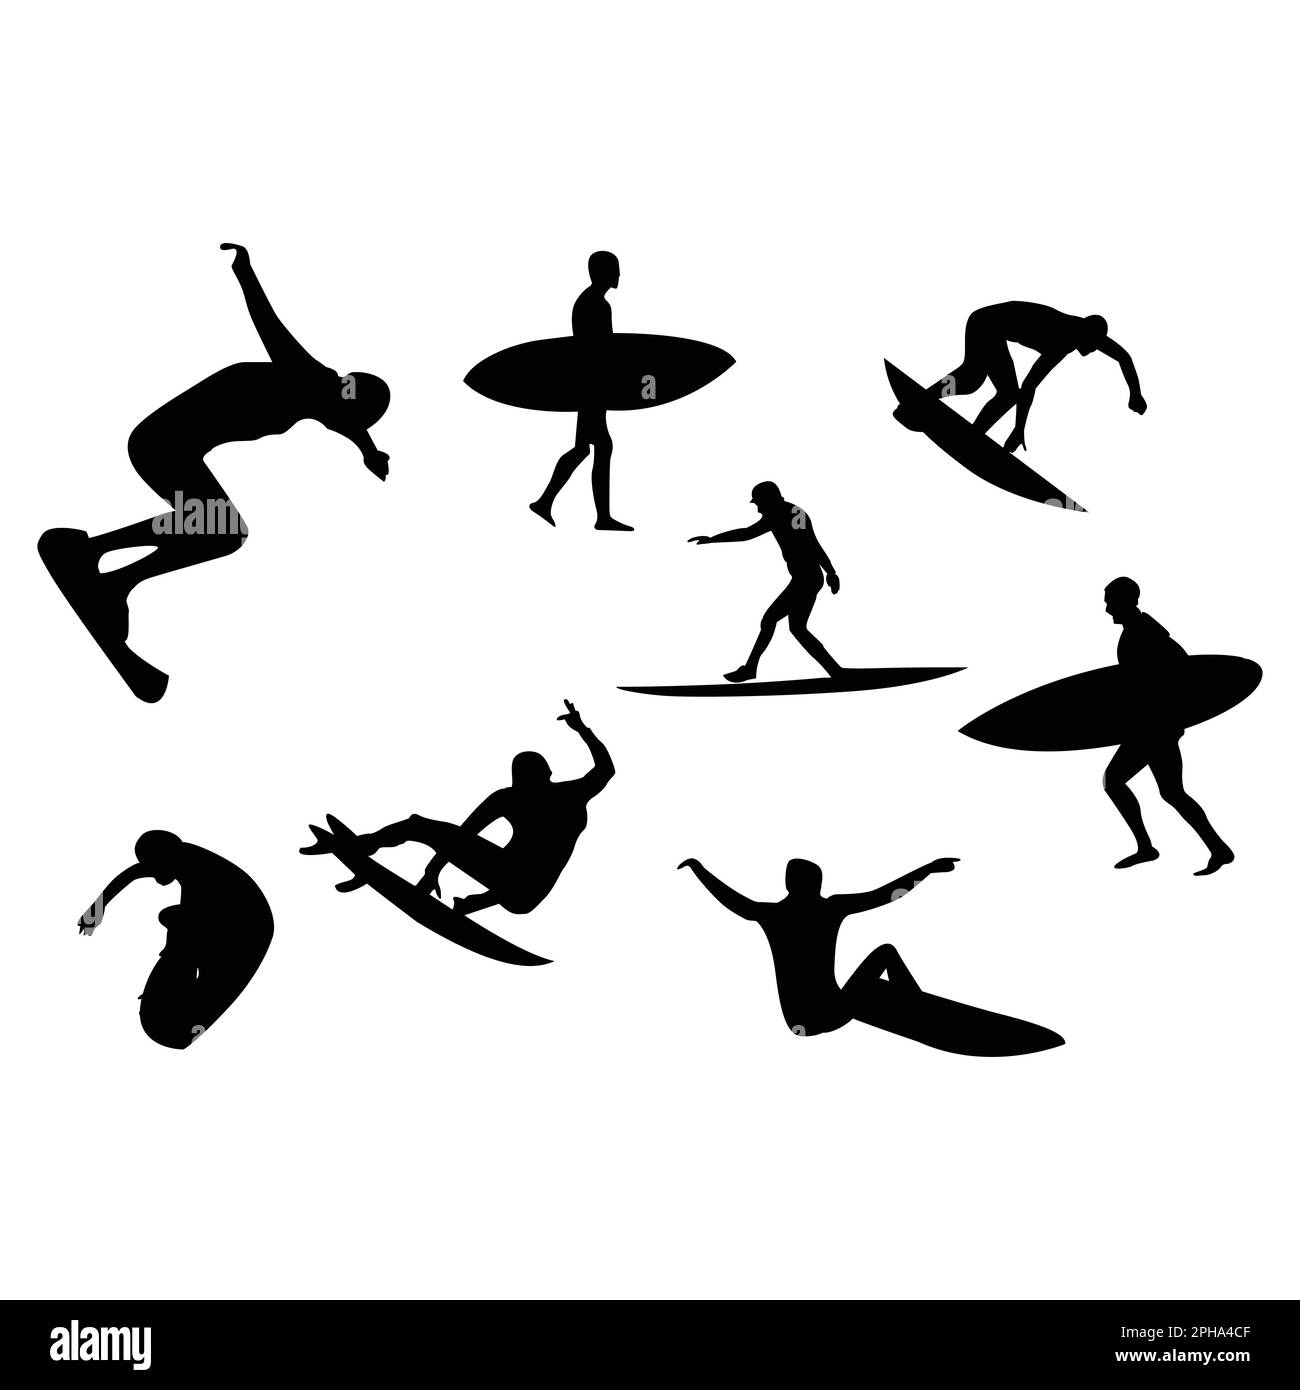 Surfers black silhouettes on a white background, vector illustration. Stock Vector